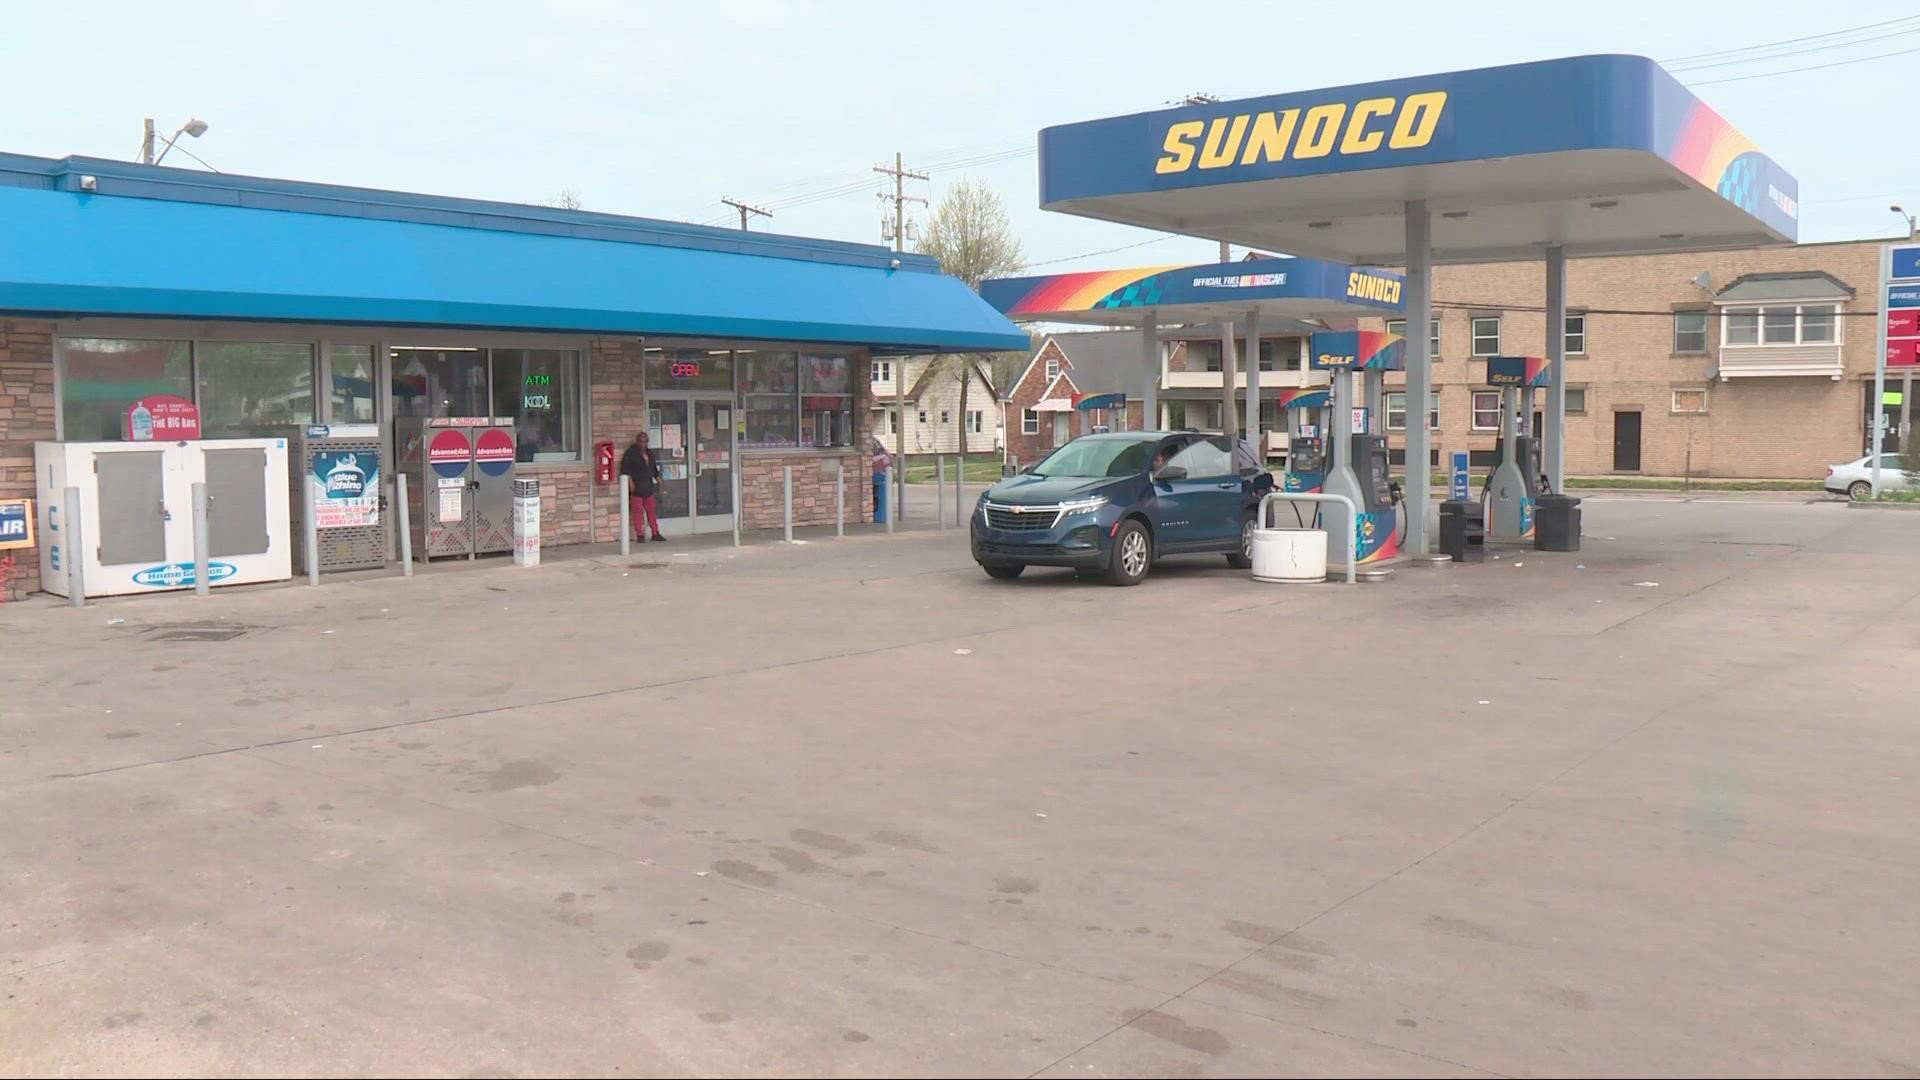 Police say this happened around 1am at a Sunoco station on east 222nd street.